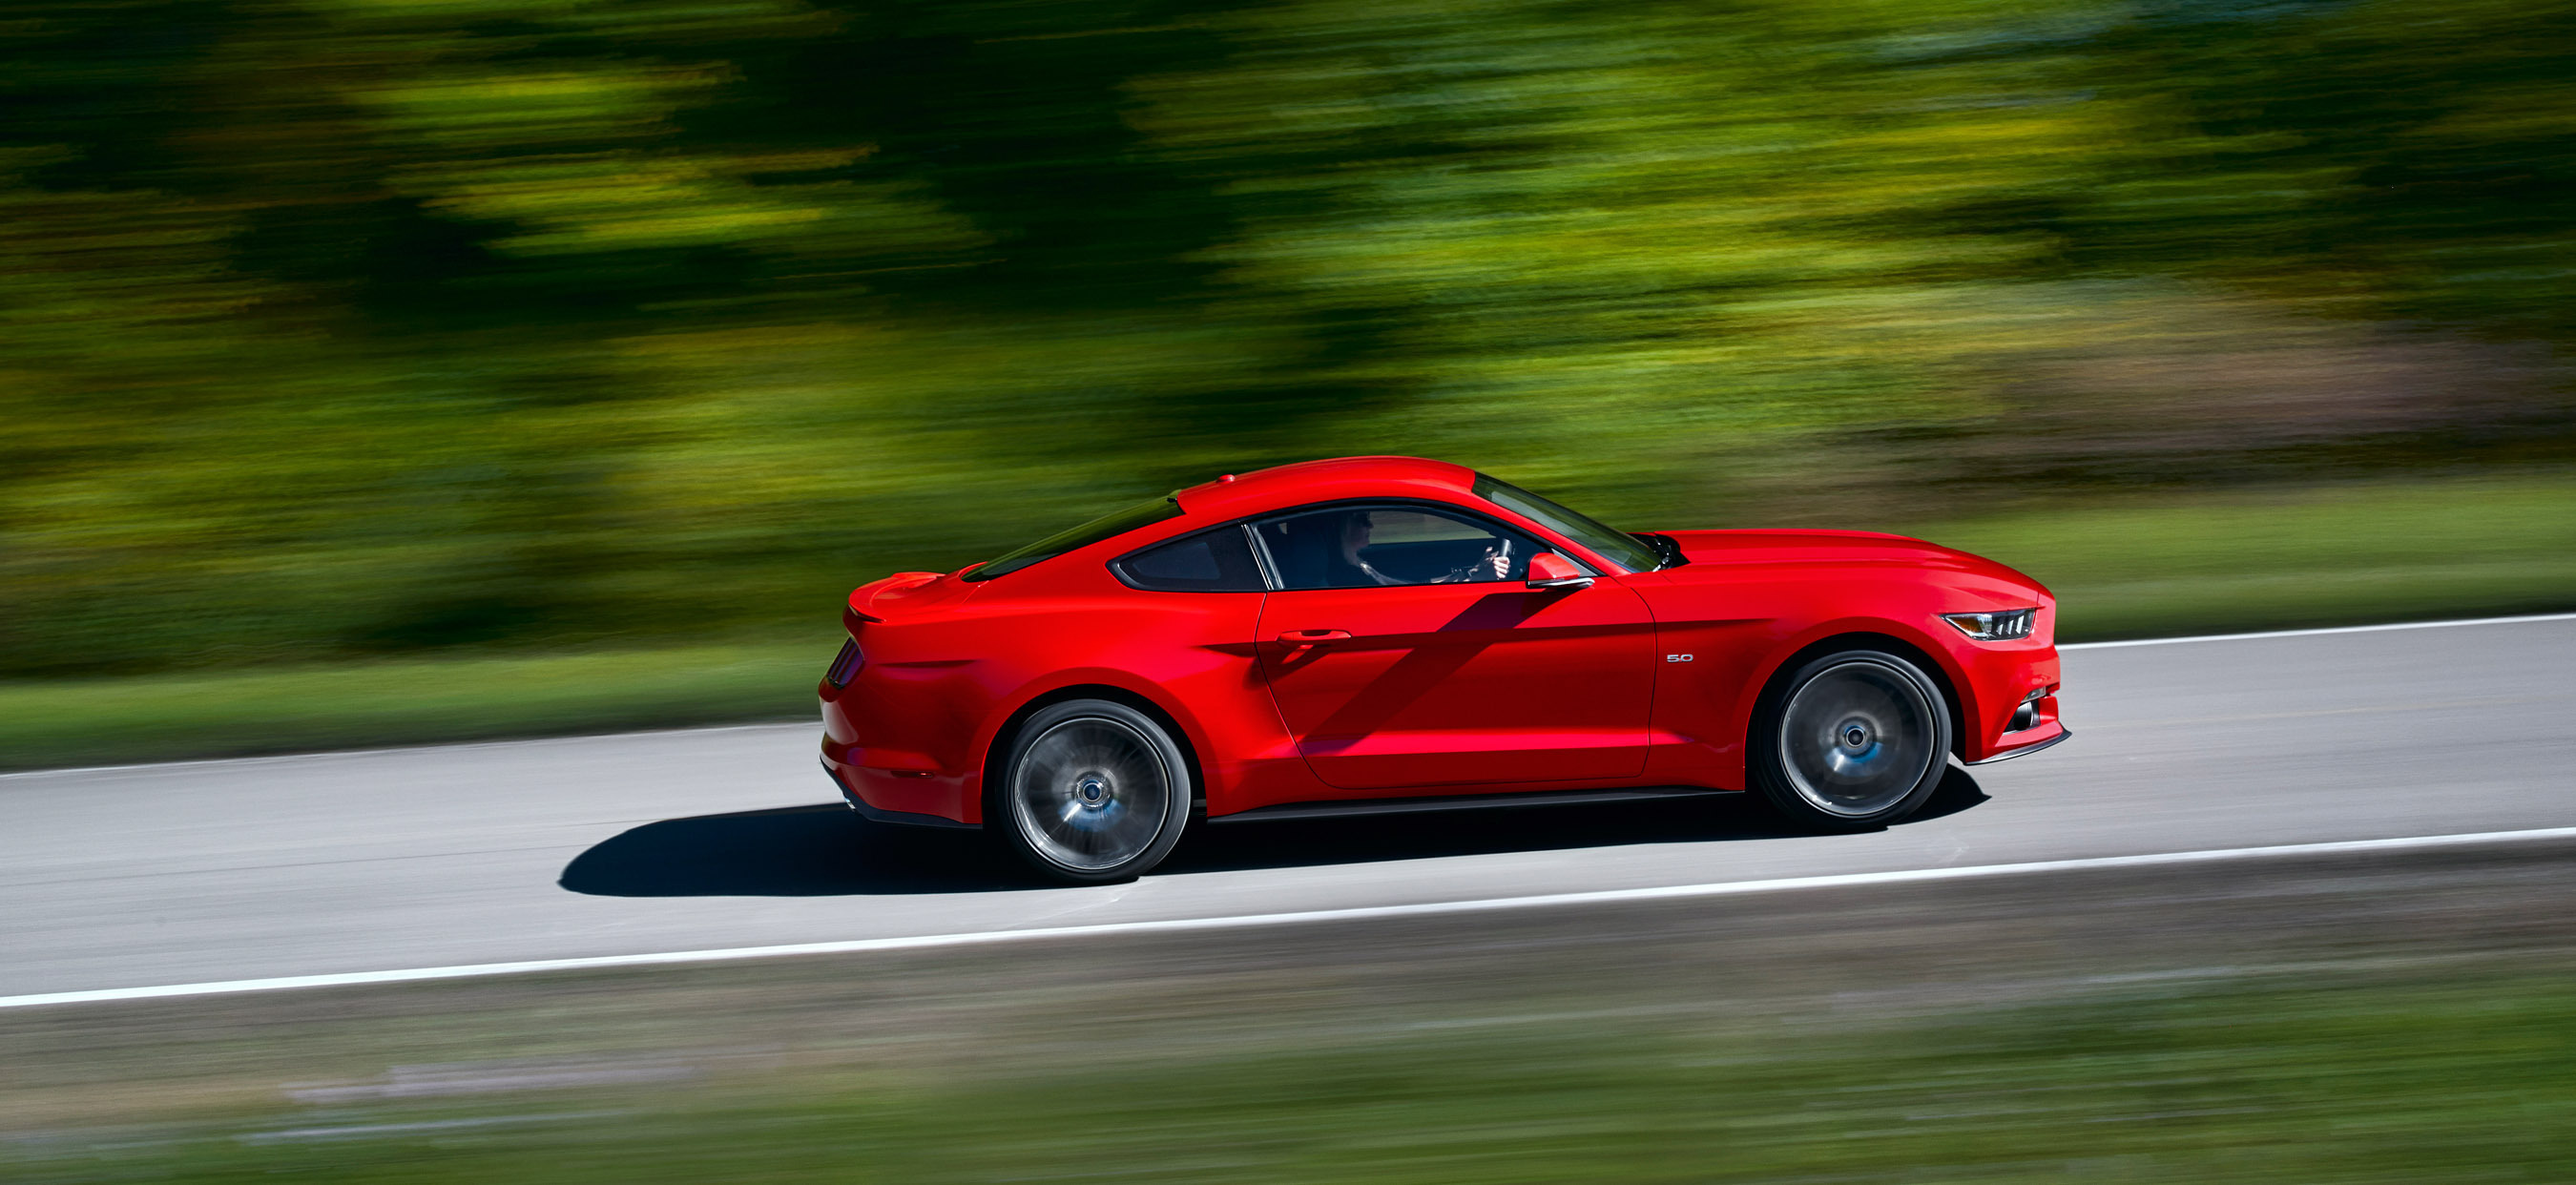 All-new Ford Mustang. (PRNewsFoto/Ford Motor Company) (PRNewsFoto/FORD MOTOR COMPANY)